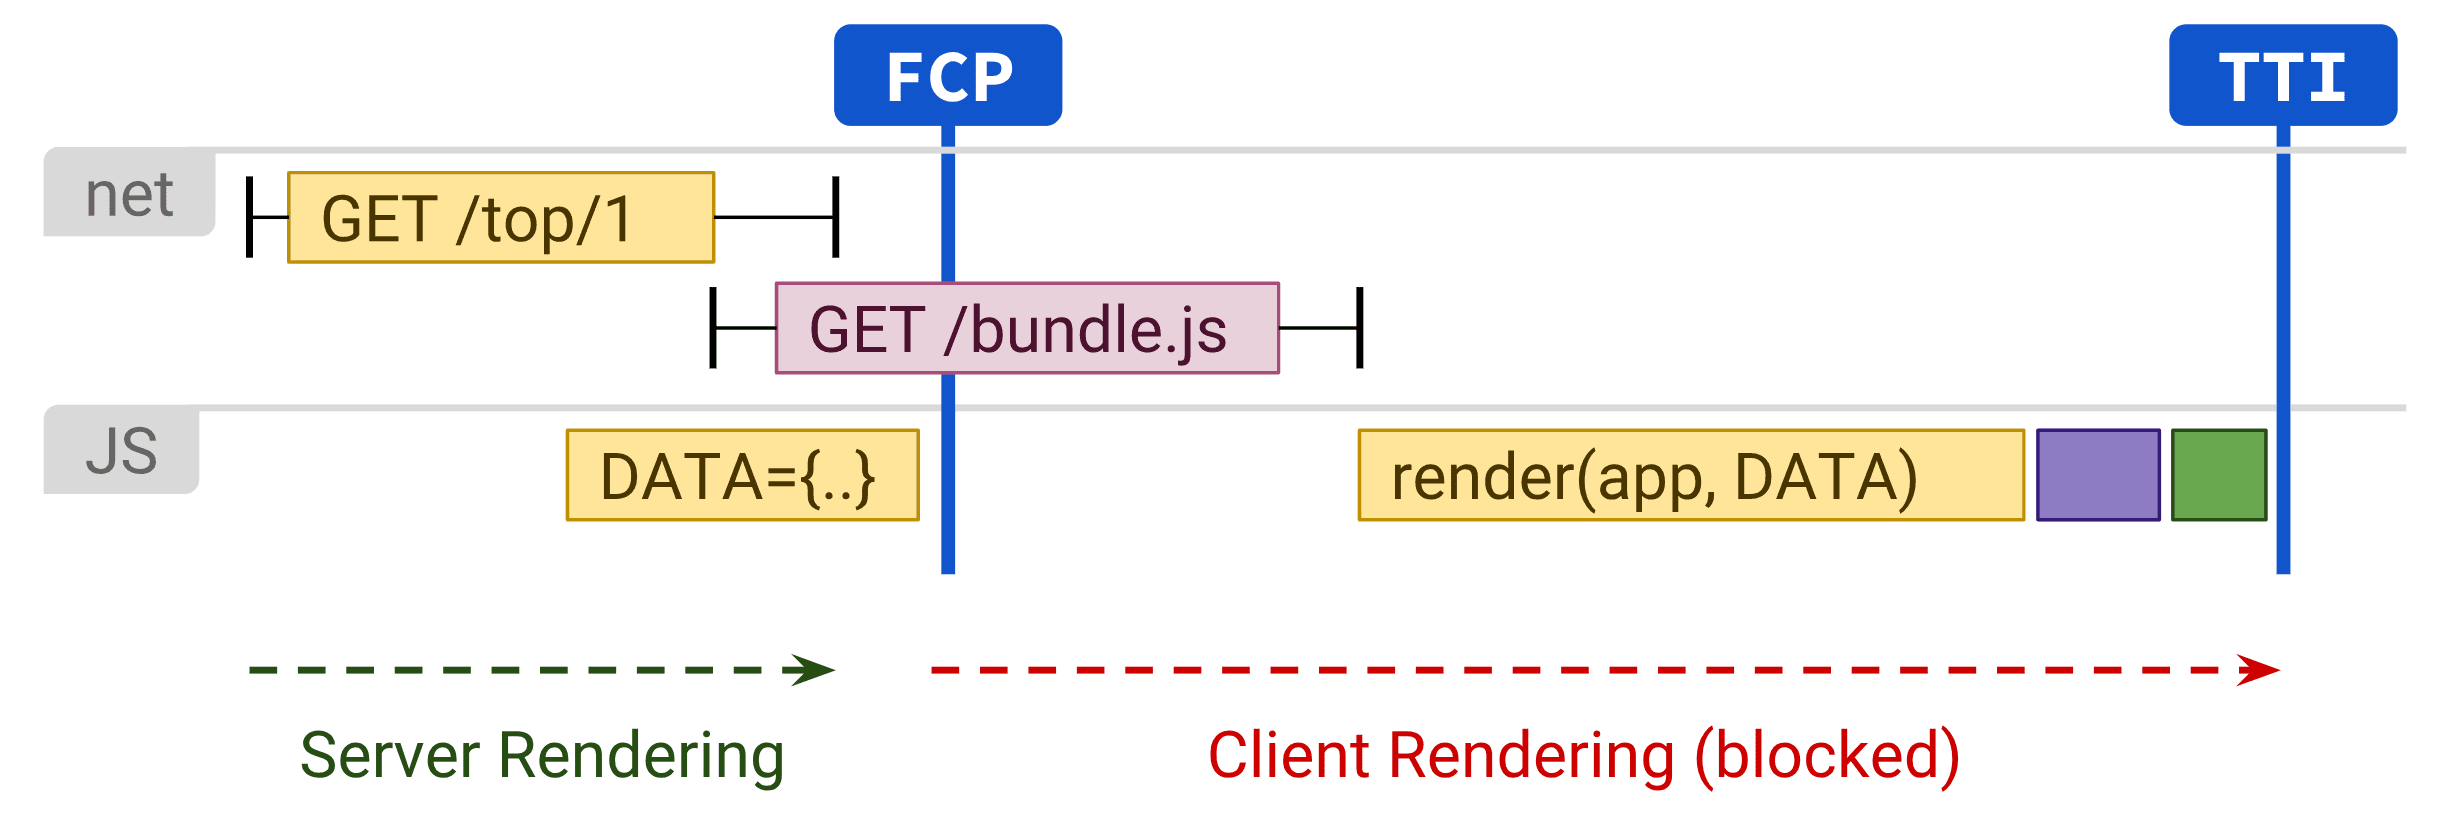 Diagram showing client rendering negatively affecting TTI.